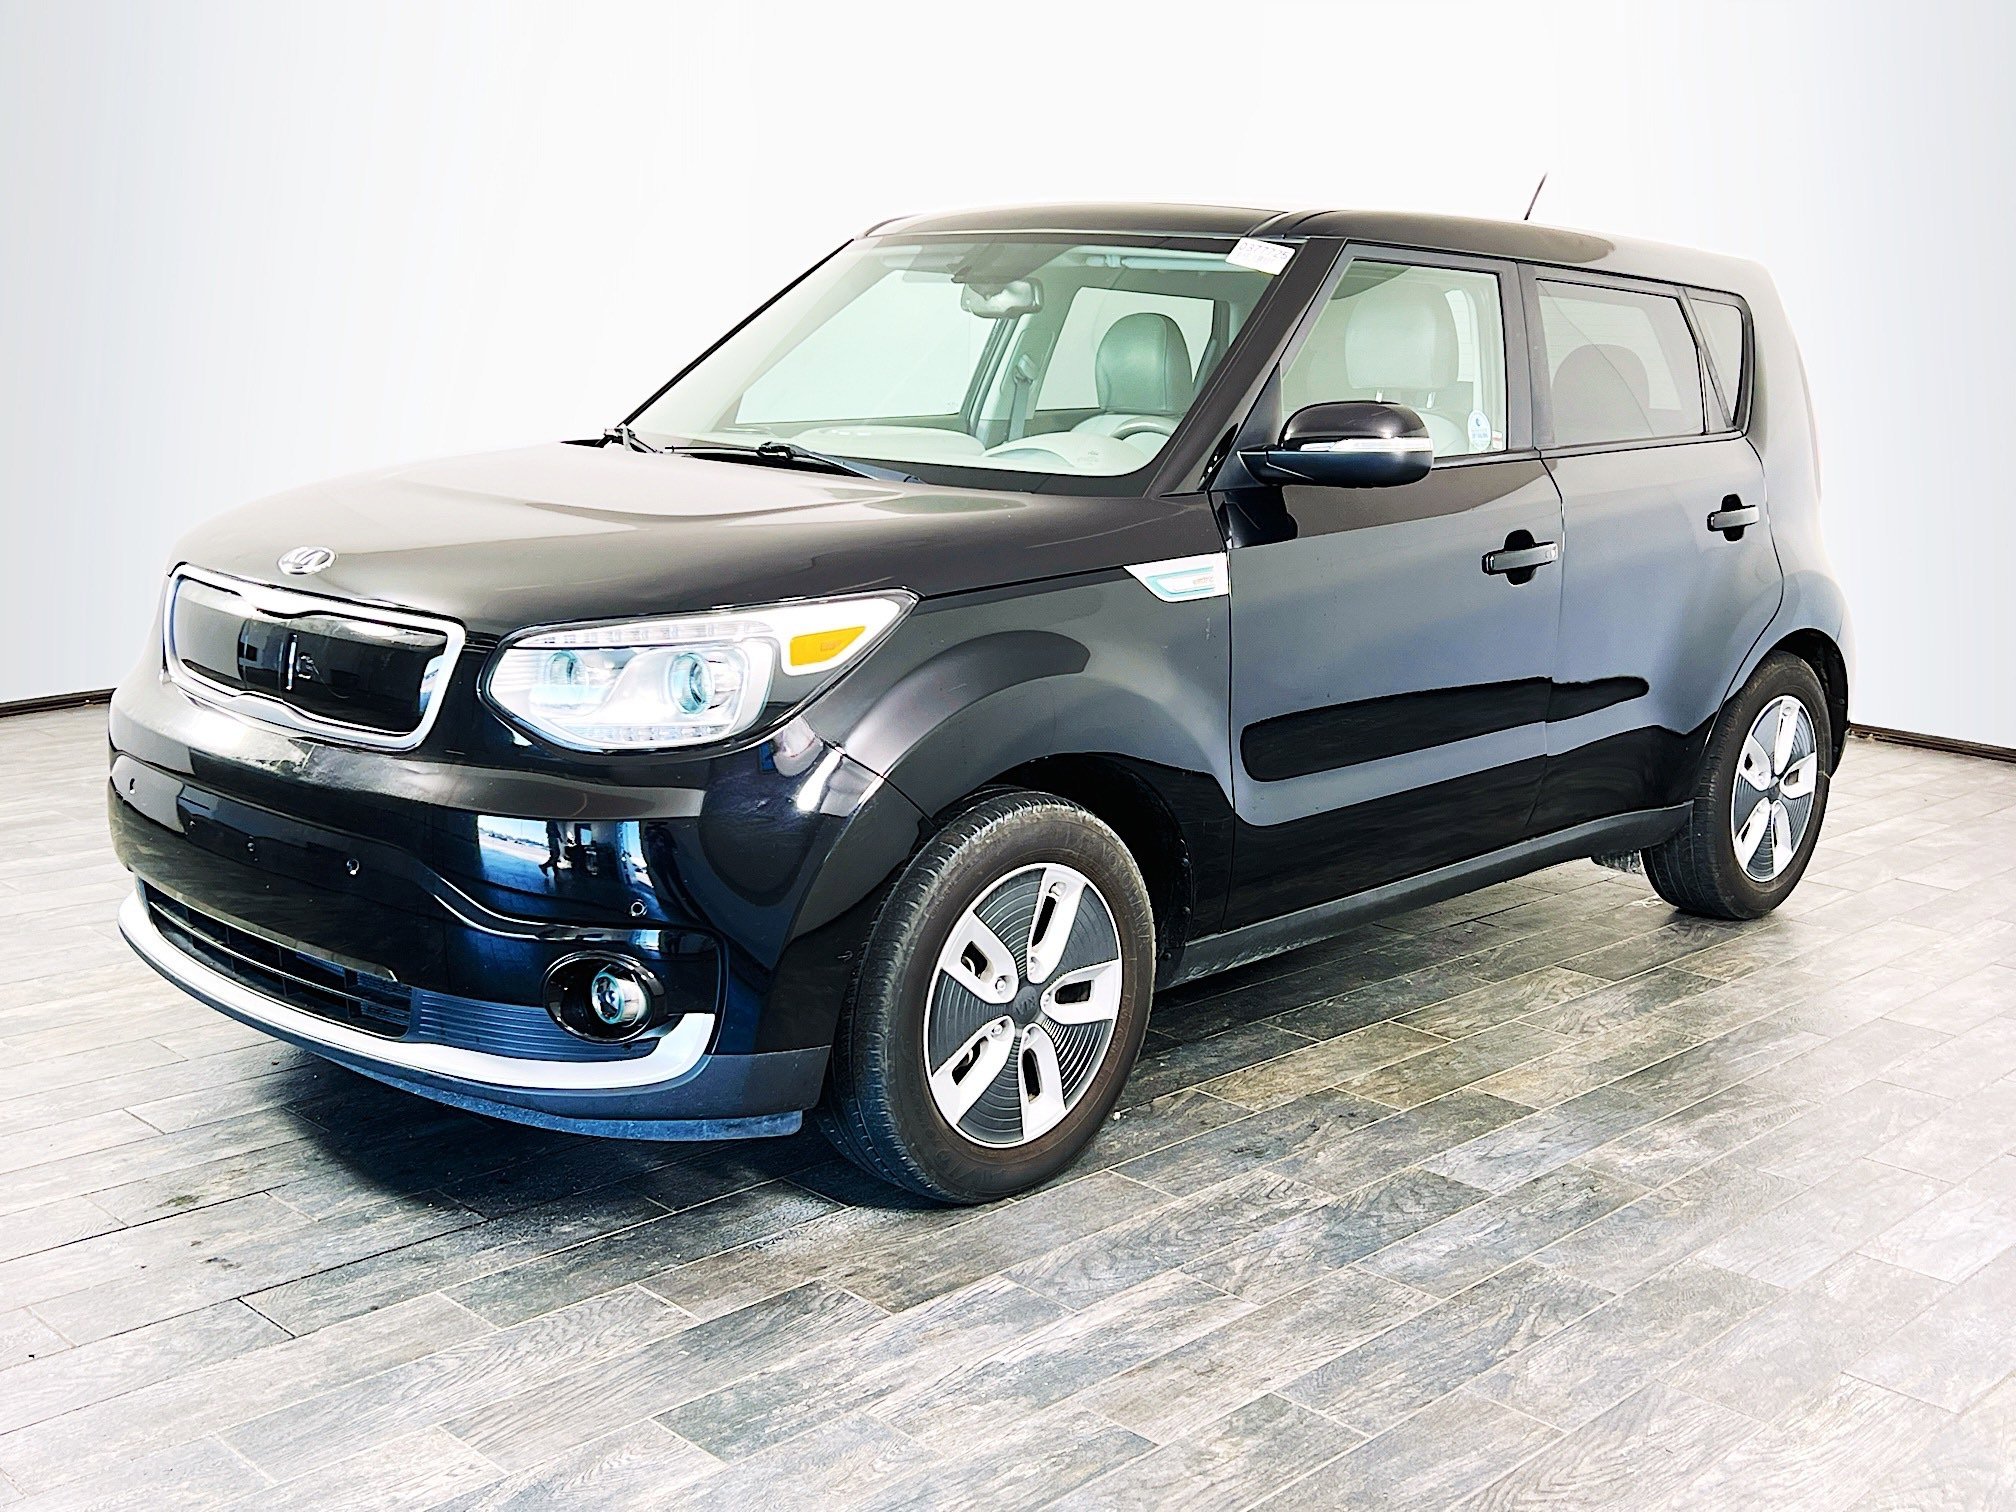 Used 2017 Kia Soul EV For Sale at Off Lease Only | VIN: KNDJX3AE9H7021525